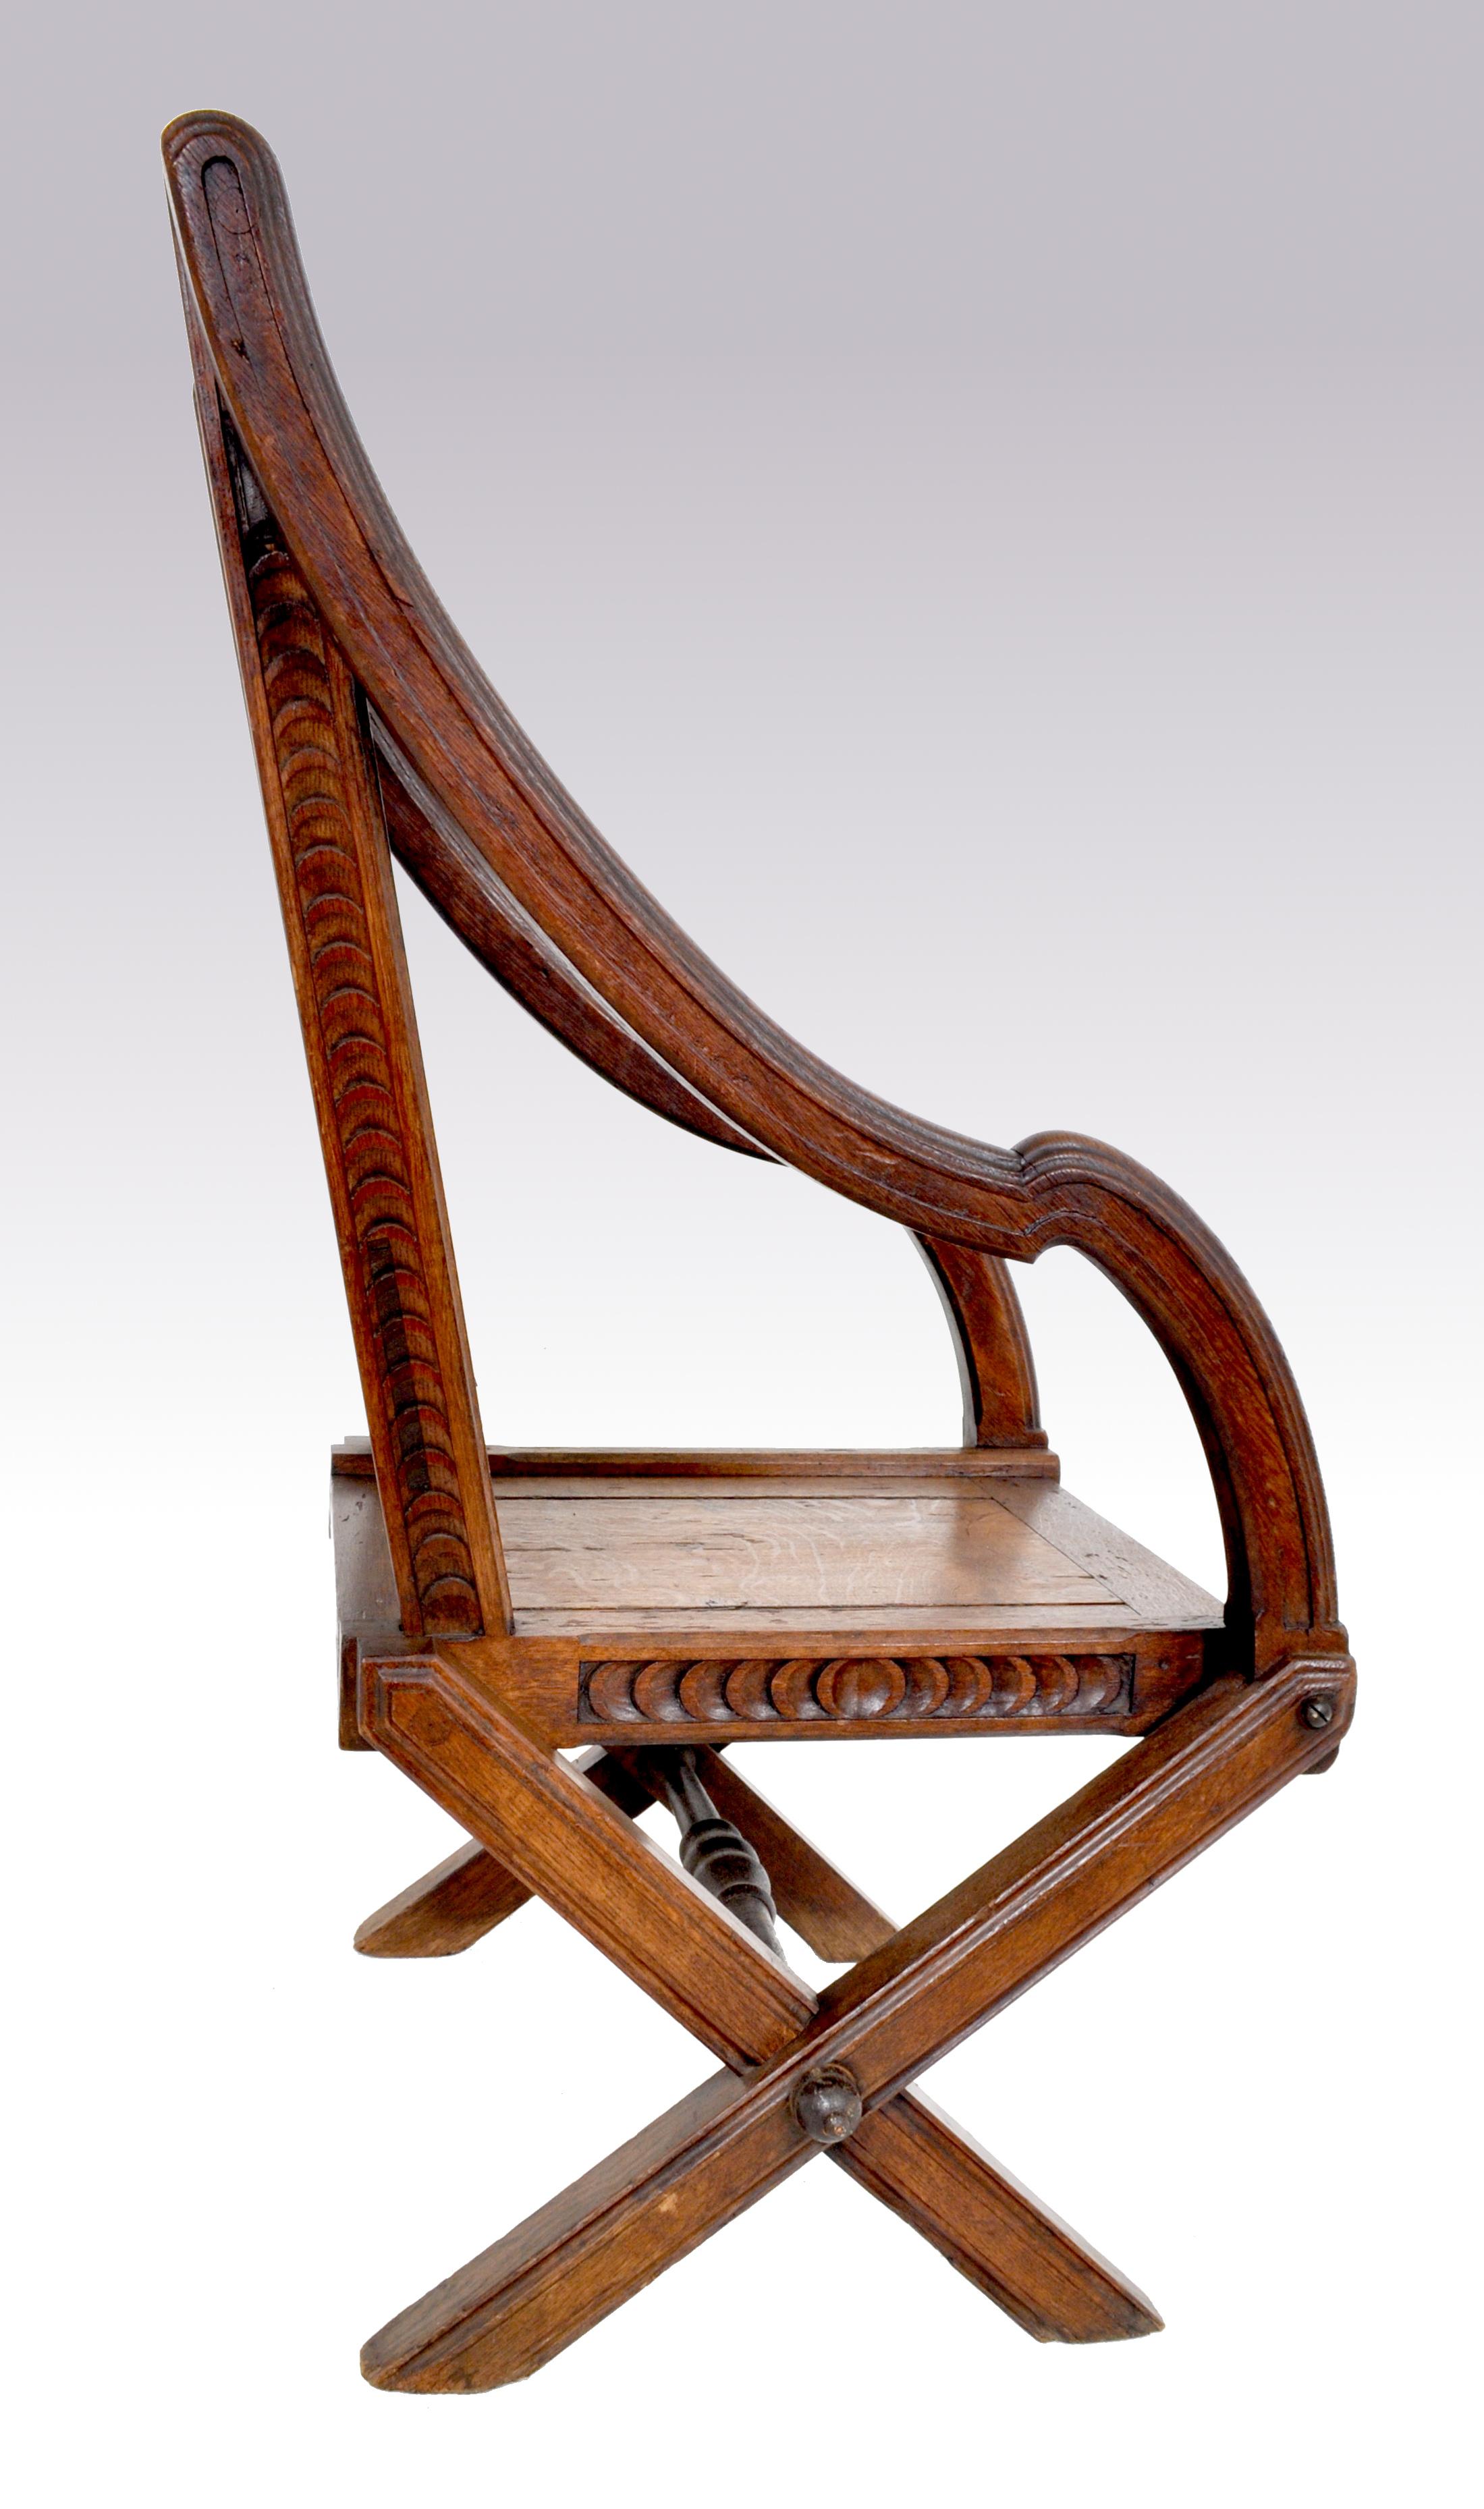 Mid-19th Century Carved English Gothic Revival Bishop's Throne Chair, A. W. Pugin, circa 1855